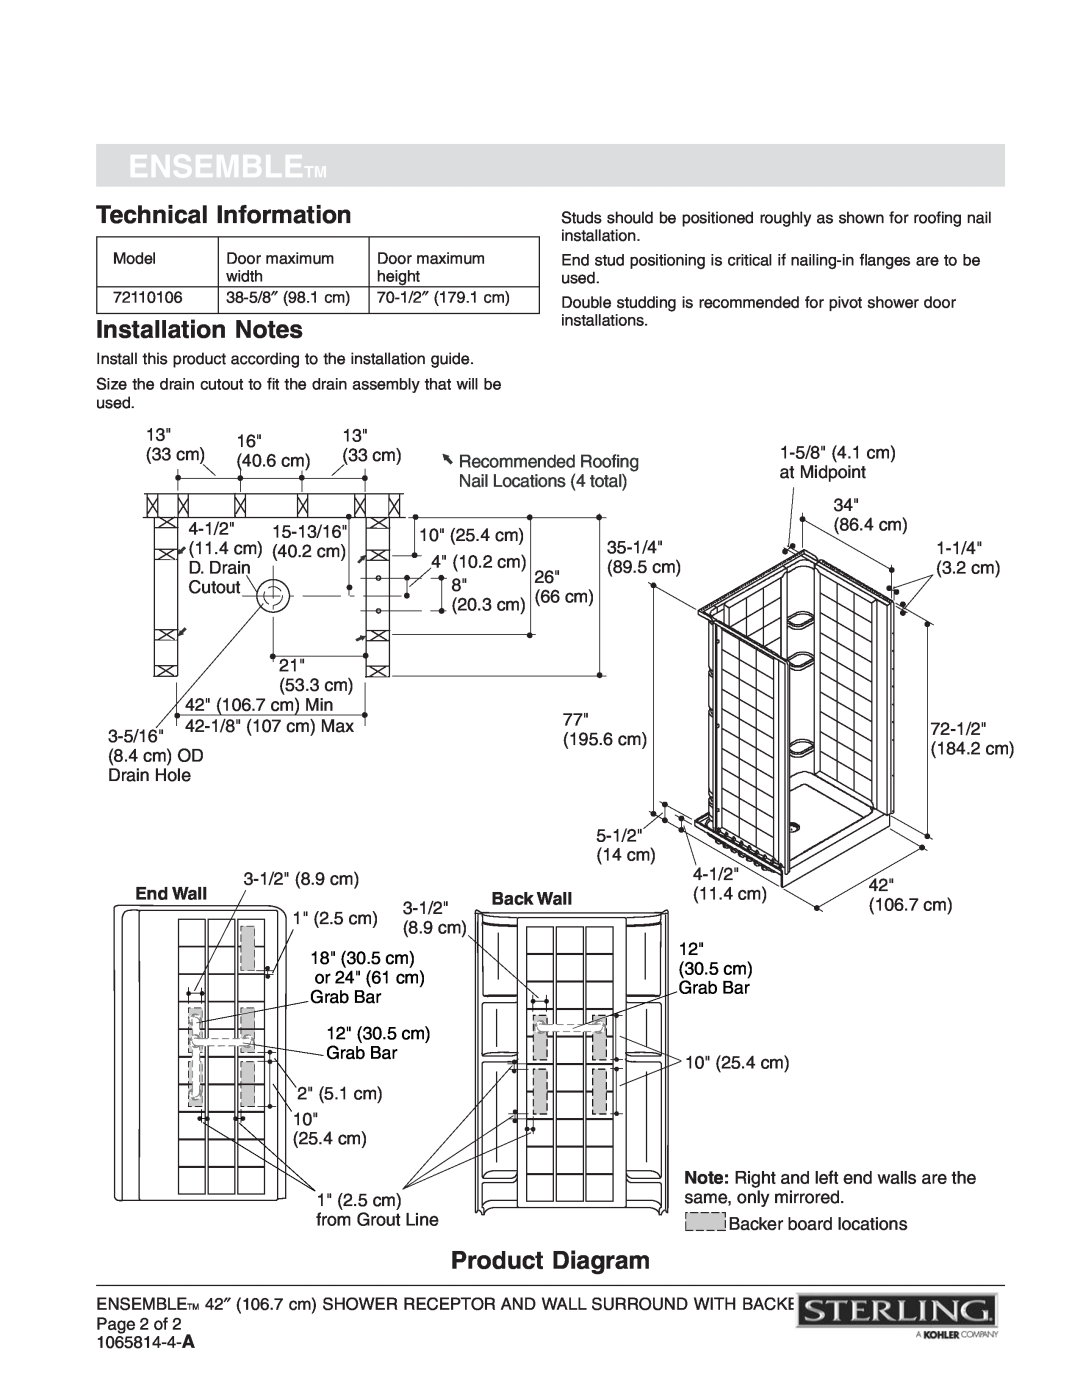 Sterling Plumbing 72110106 Technical Information, Installation Notes, Product Diagram, Ensembletm, Recommended Roofing 